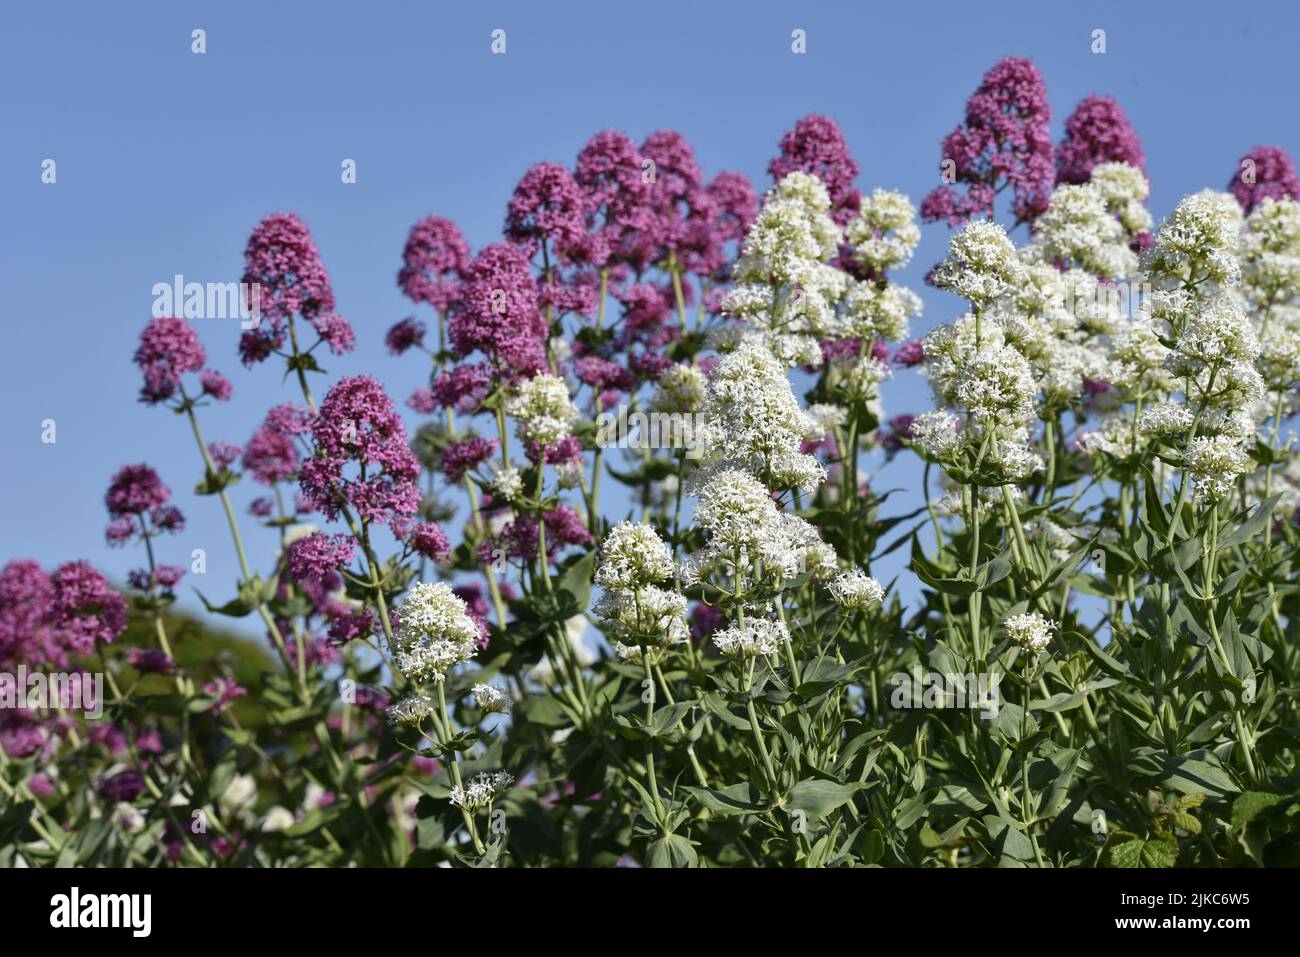 Image of White Valerian in Foreground with Pink Valerian Behind (Centranthus ruber) Against a Blue Sky on the Isle of Man, UK in June Stock Photo